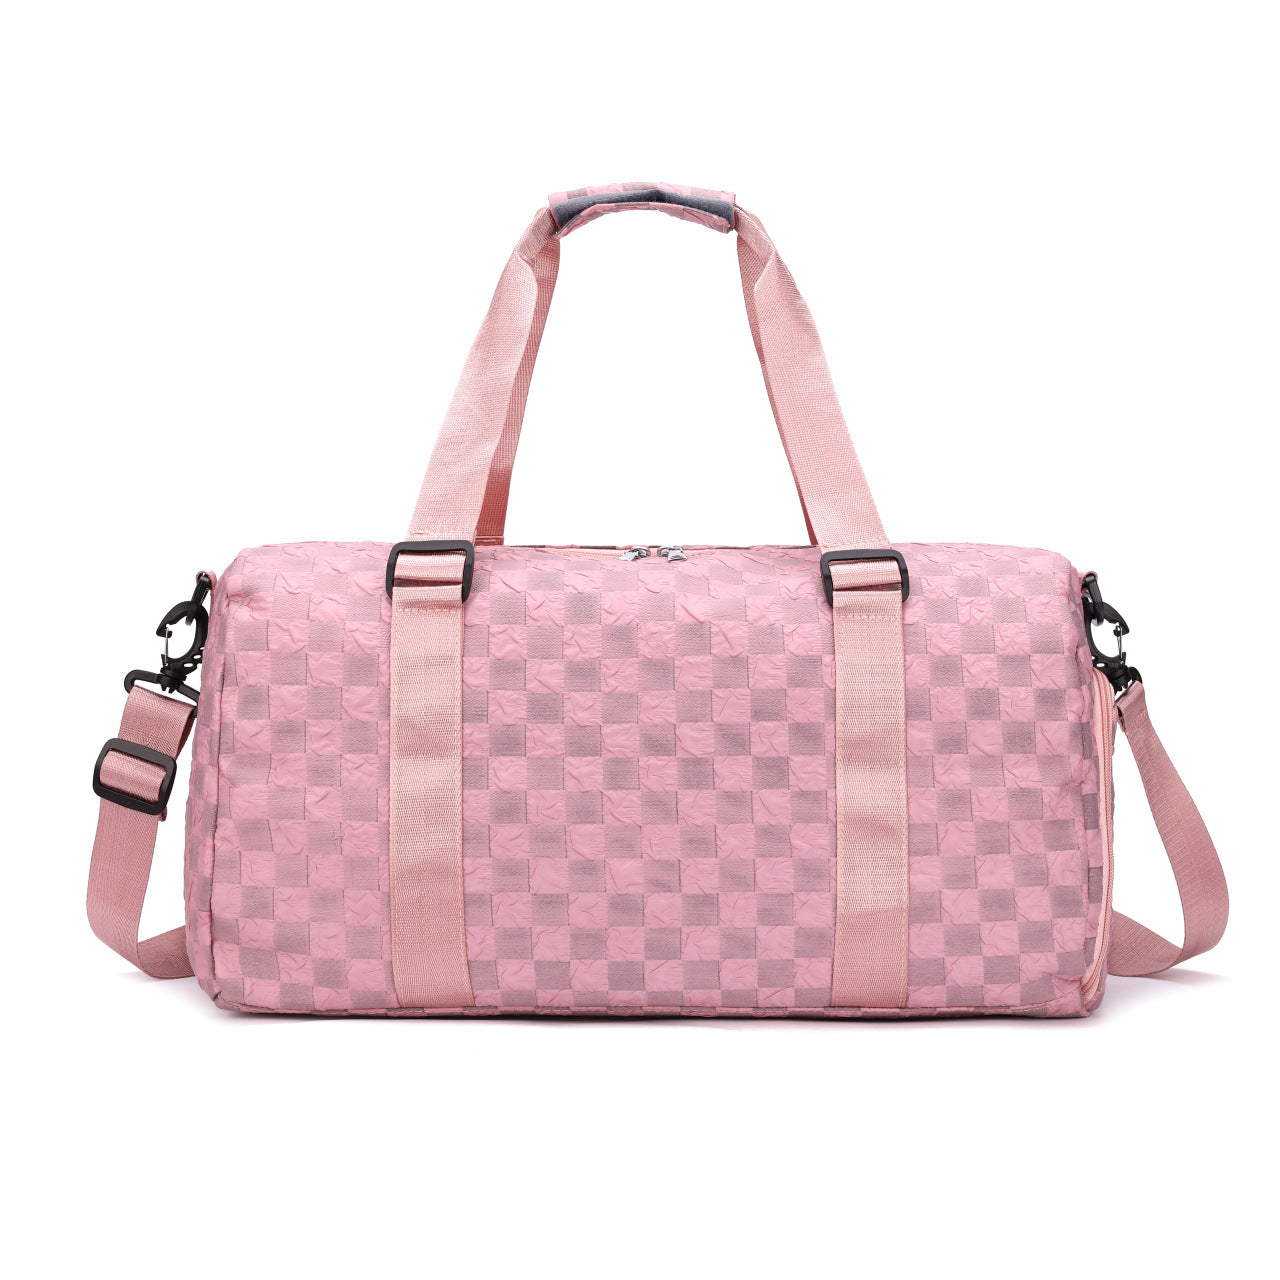 Introducing our practical Fashion Plaid Workout Gym Bag! This stylish and durable bag is perfect for all your gym essentials. With multiple compartments and a comfortable shoulder strap, you'll have everything you need for a successful workout. Stay fashionable while staying fit with our must-have gym bag.